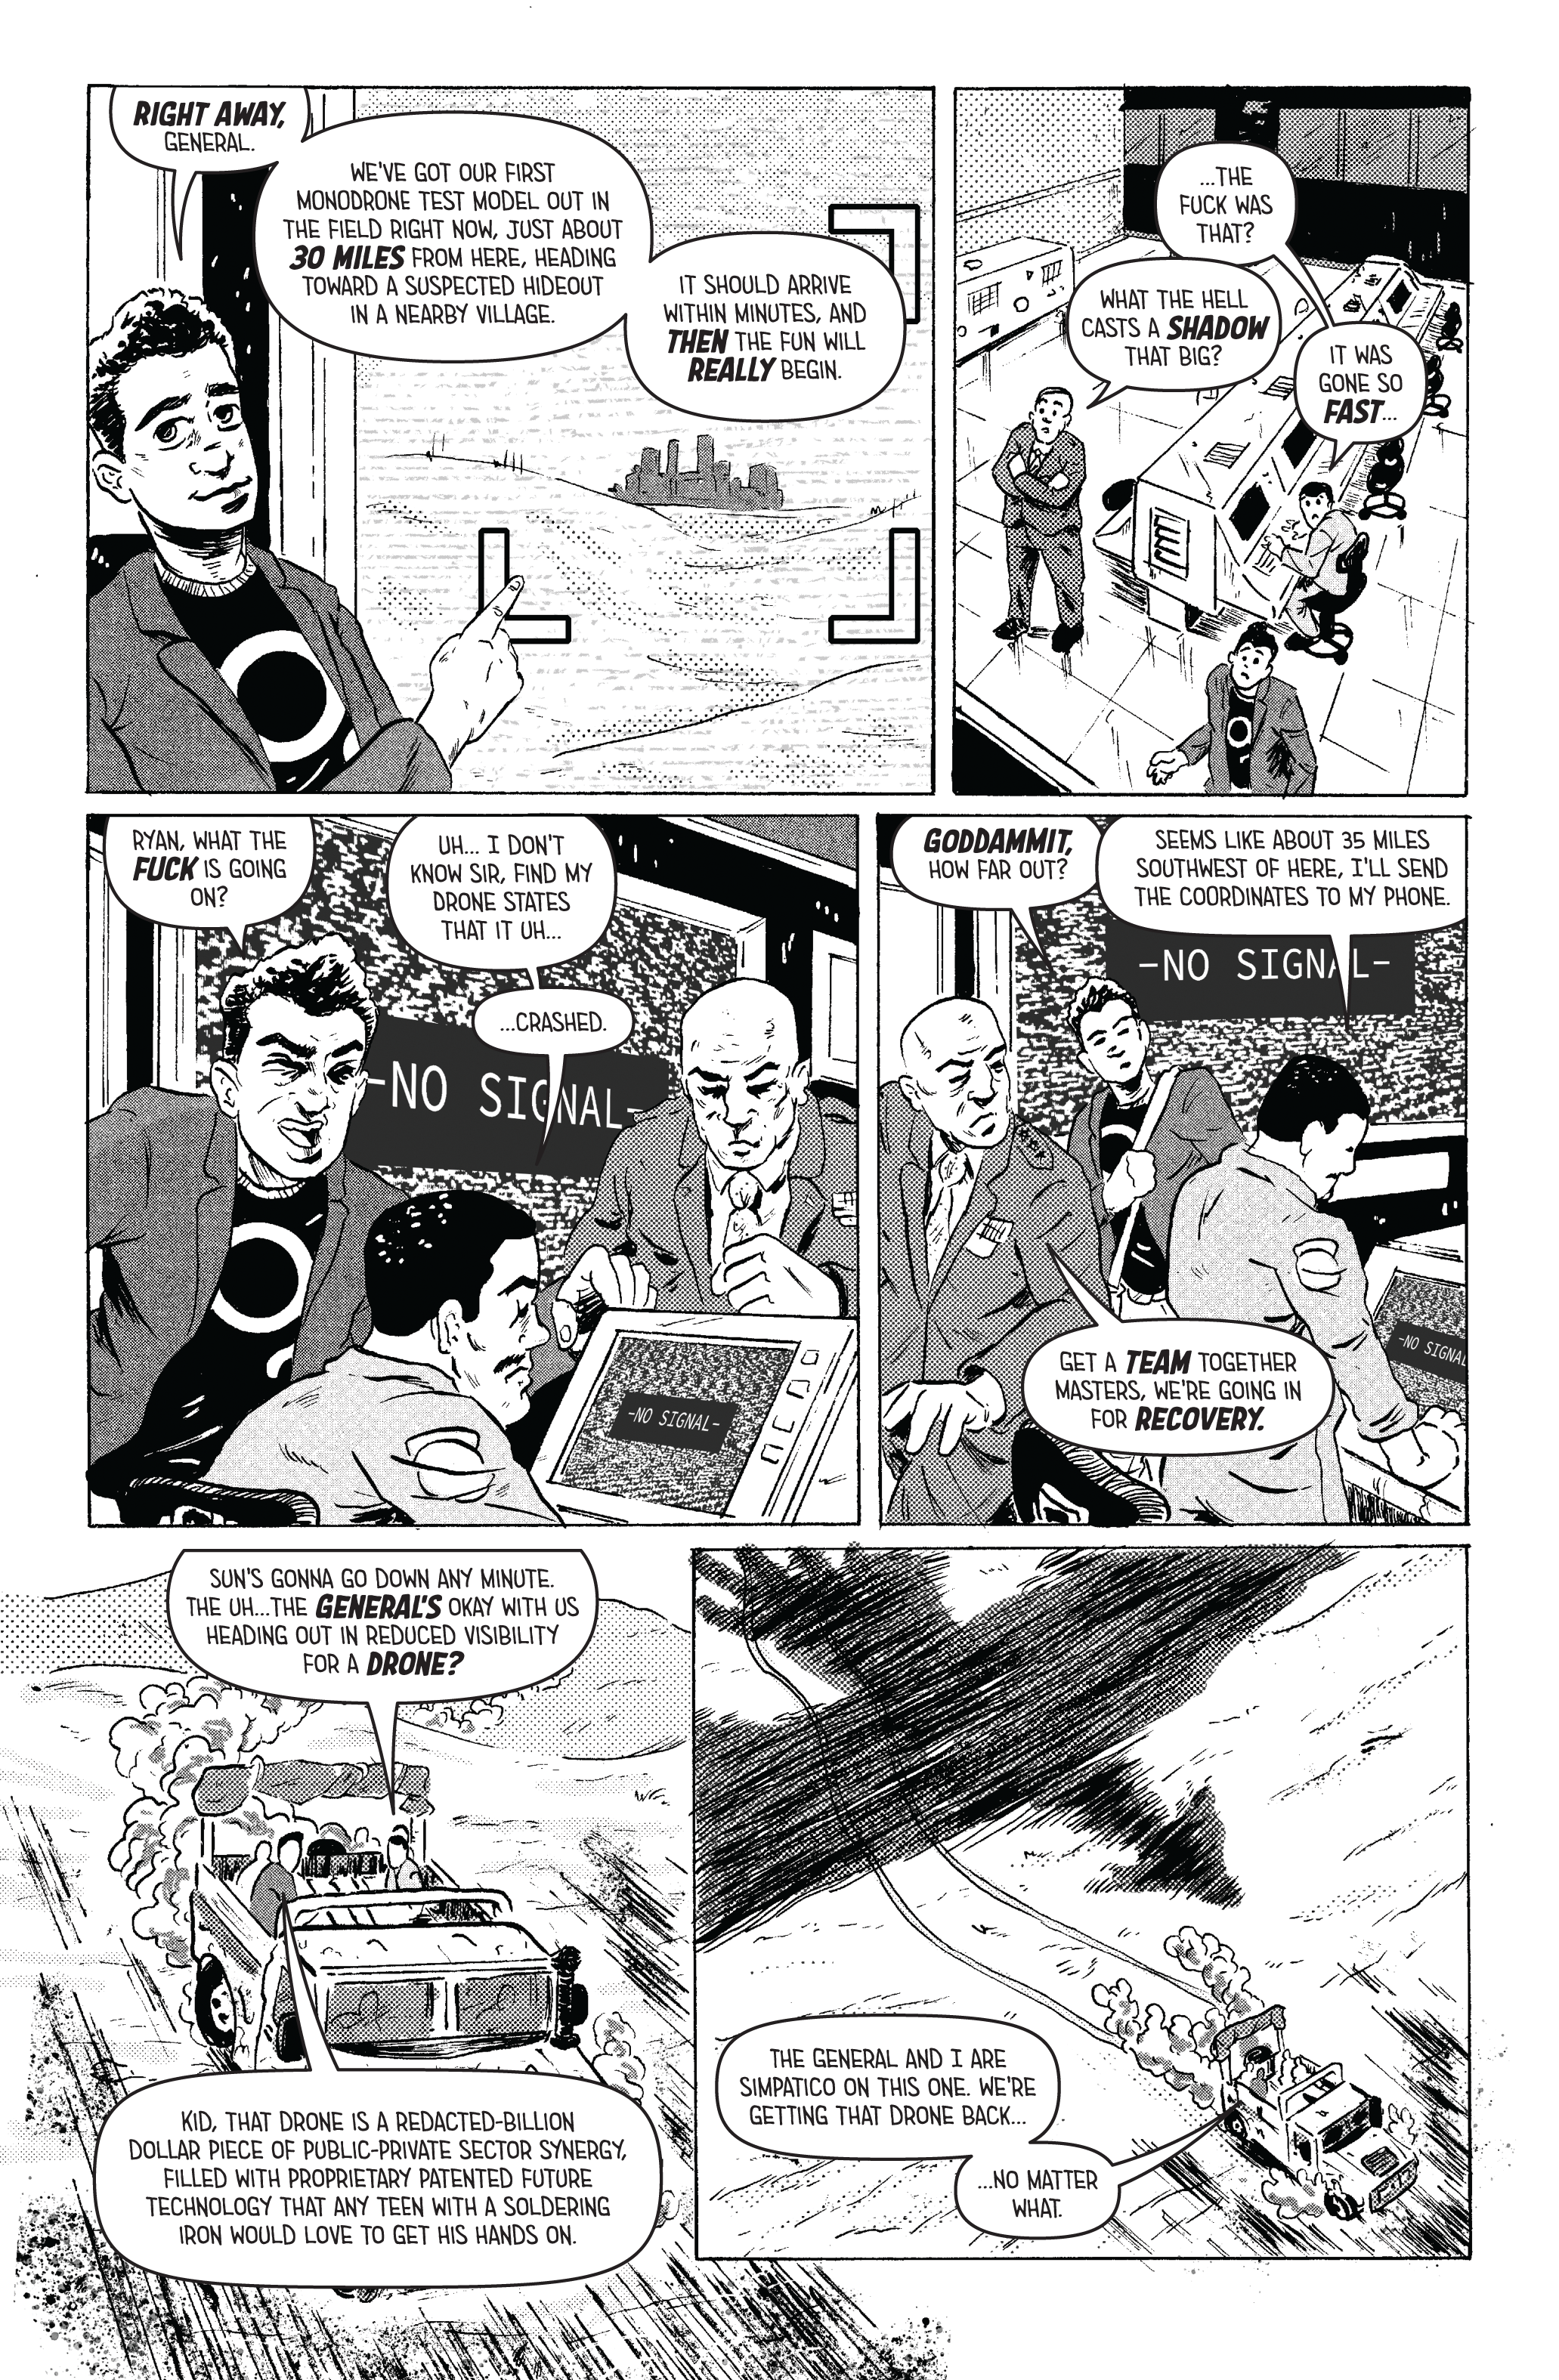 MONOCUL 02 pg 12 Death From Above pg 03-01.png